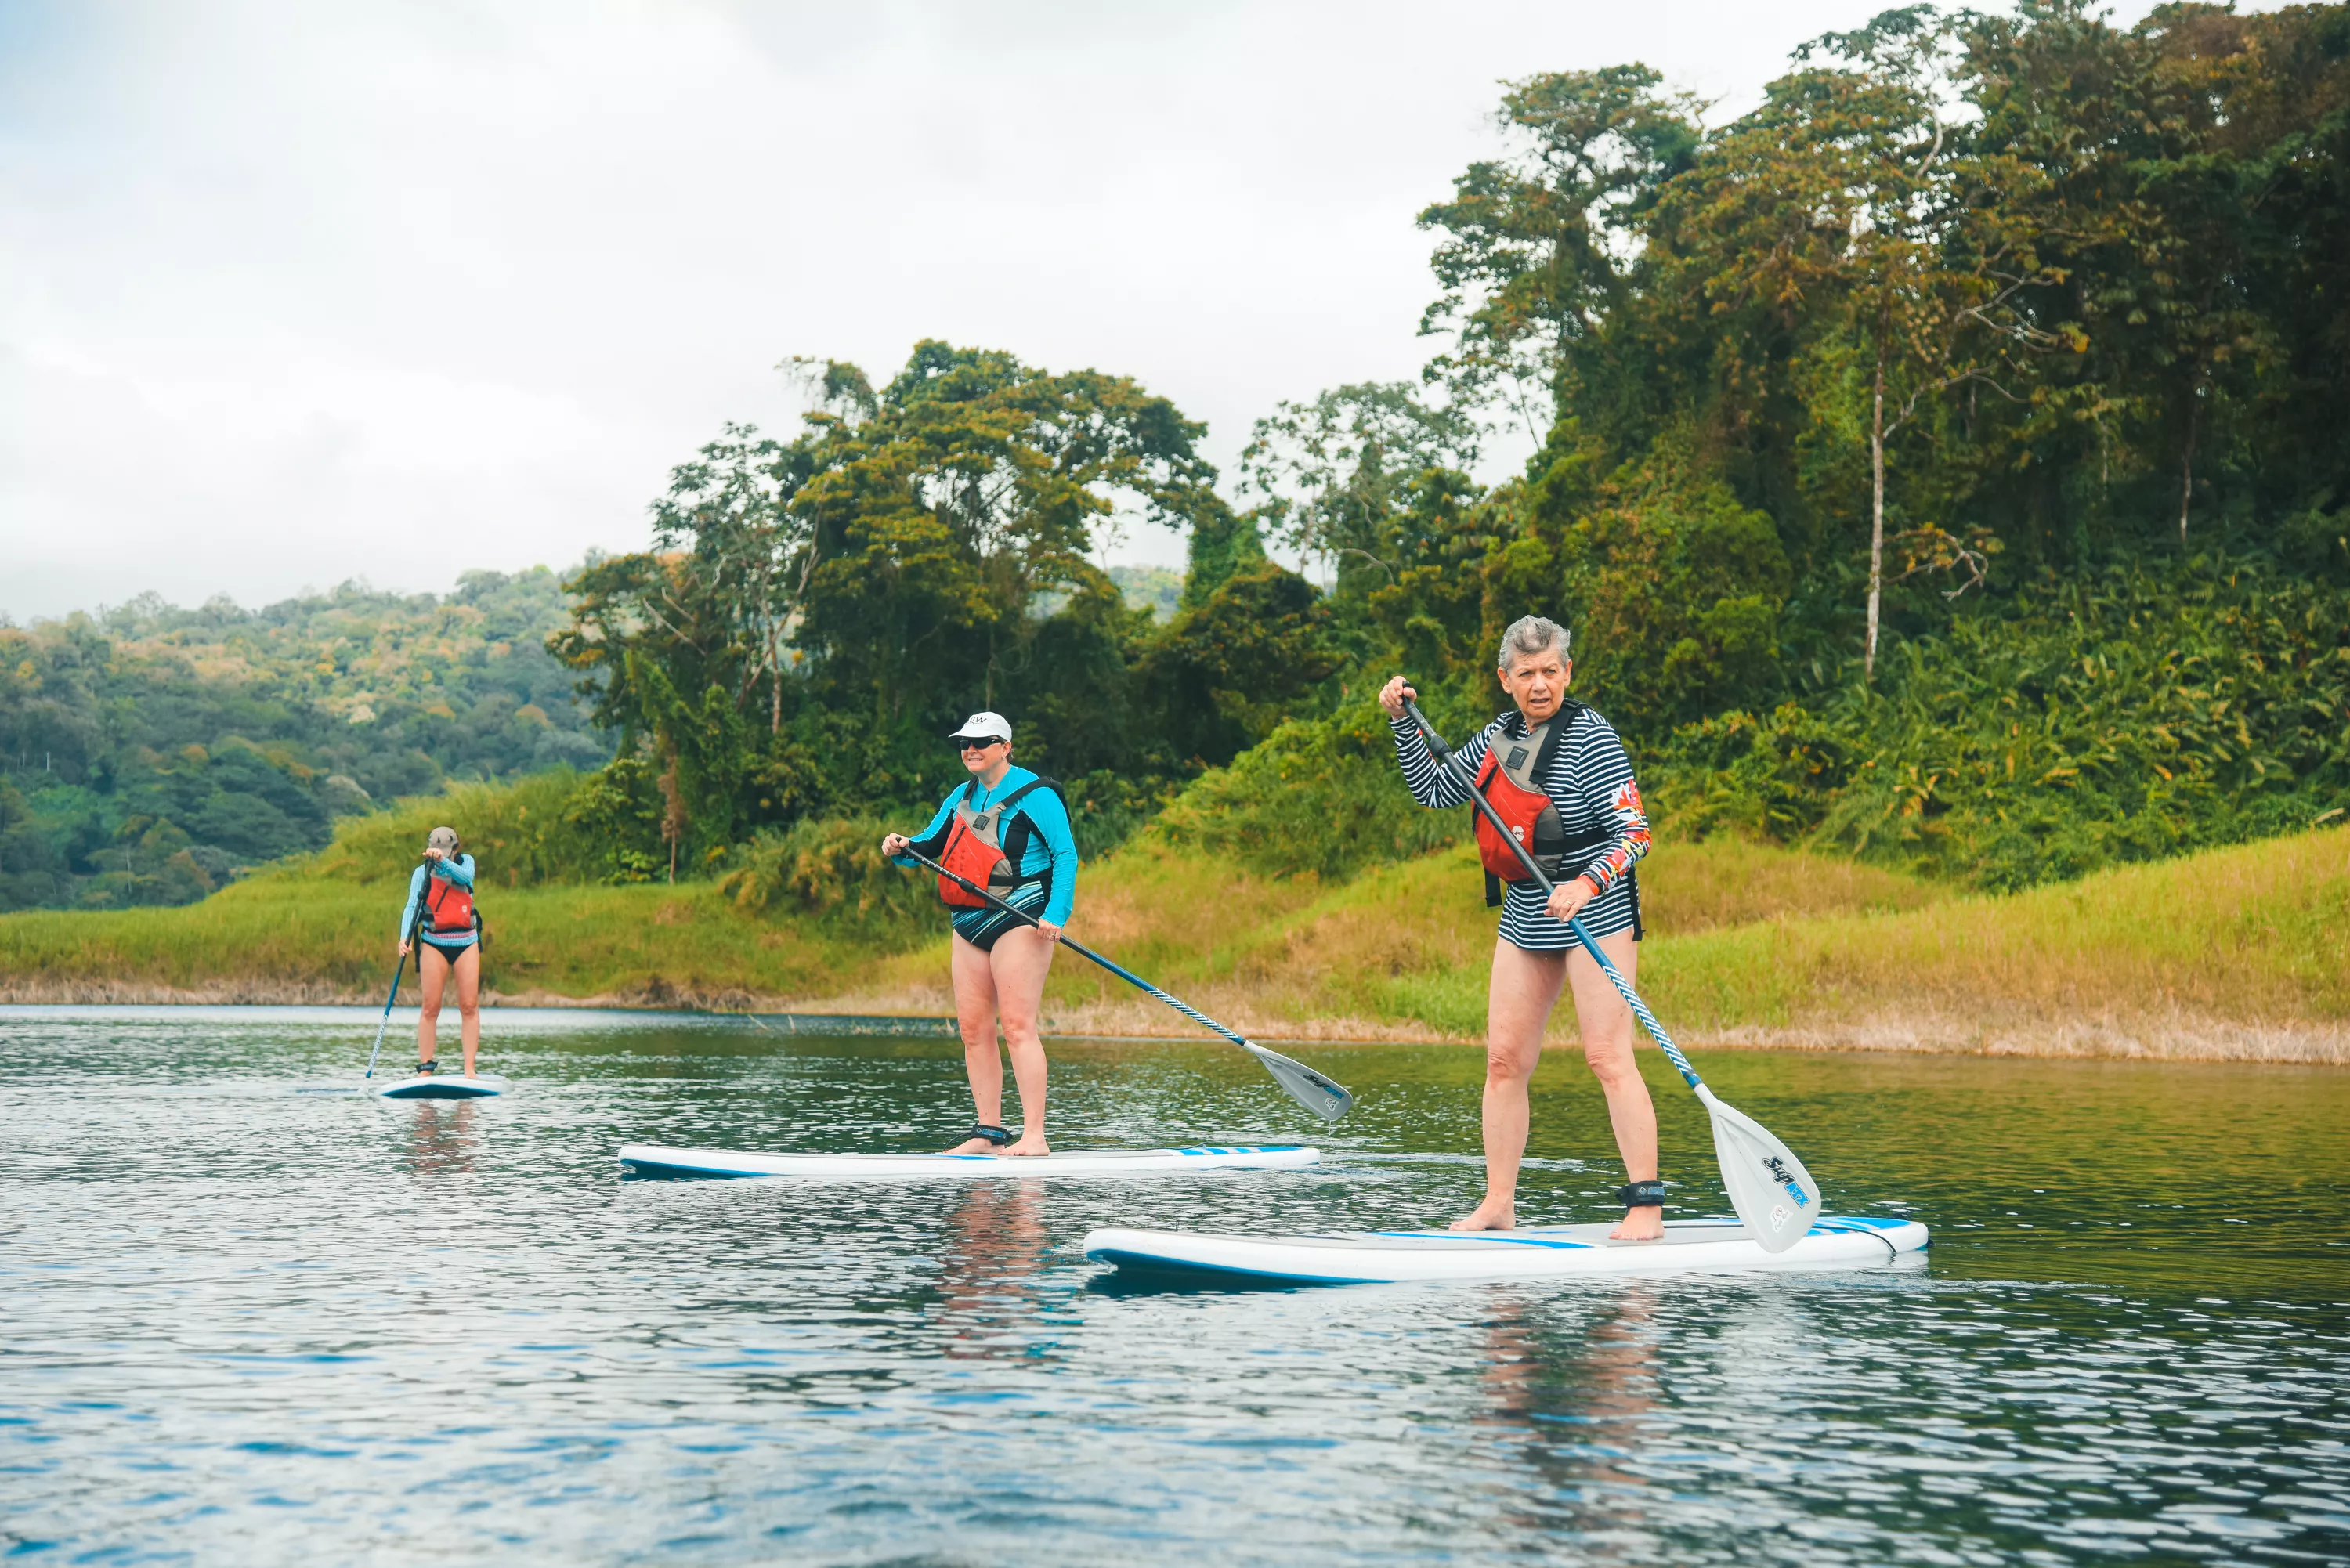 Costa Rica Stand Up Paddle Adventures in Costa Rica, North America | Surfing - Rated 0.8